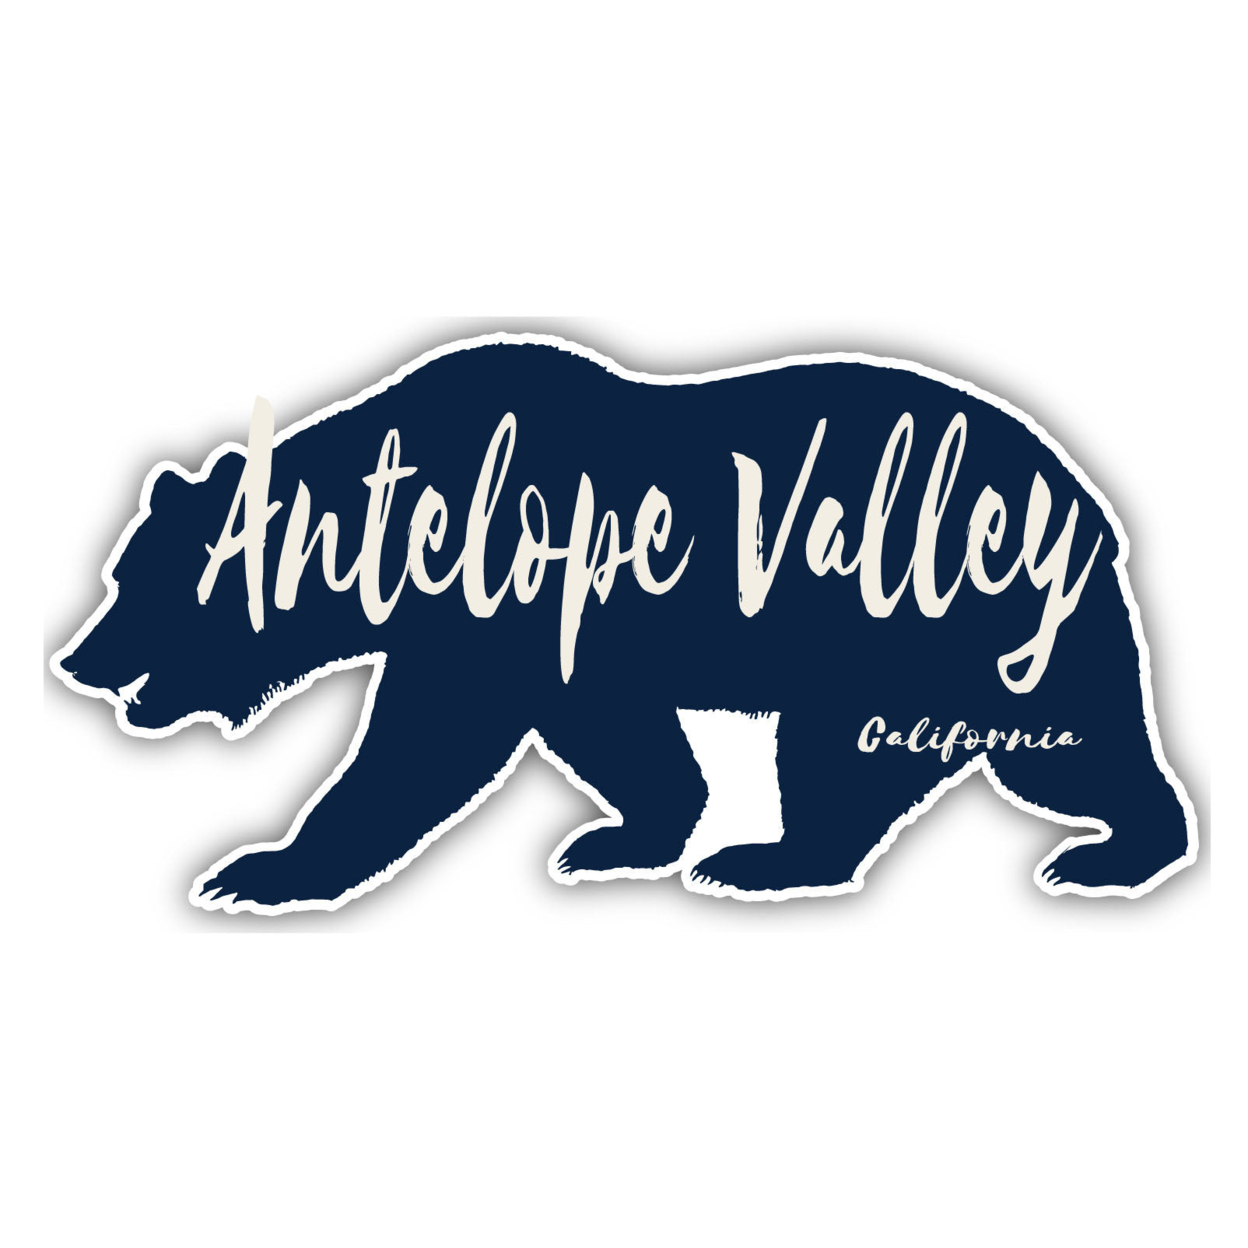 Antelope Valley California Souvenir Decorative Stickers (Choose Theme And Size) - Single Unit, 12-Inch, Bear